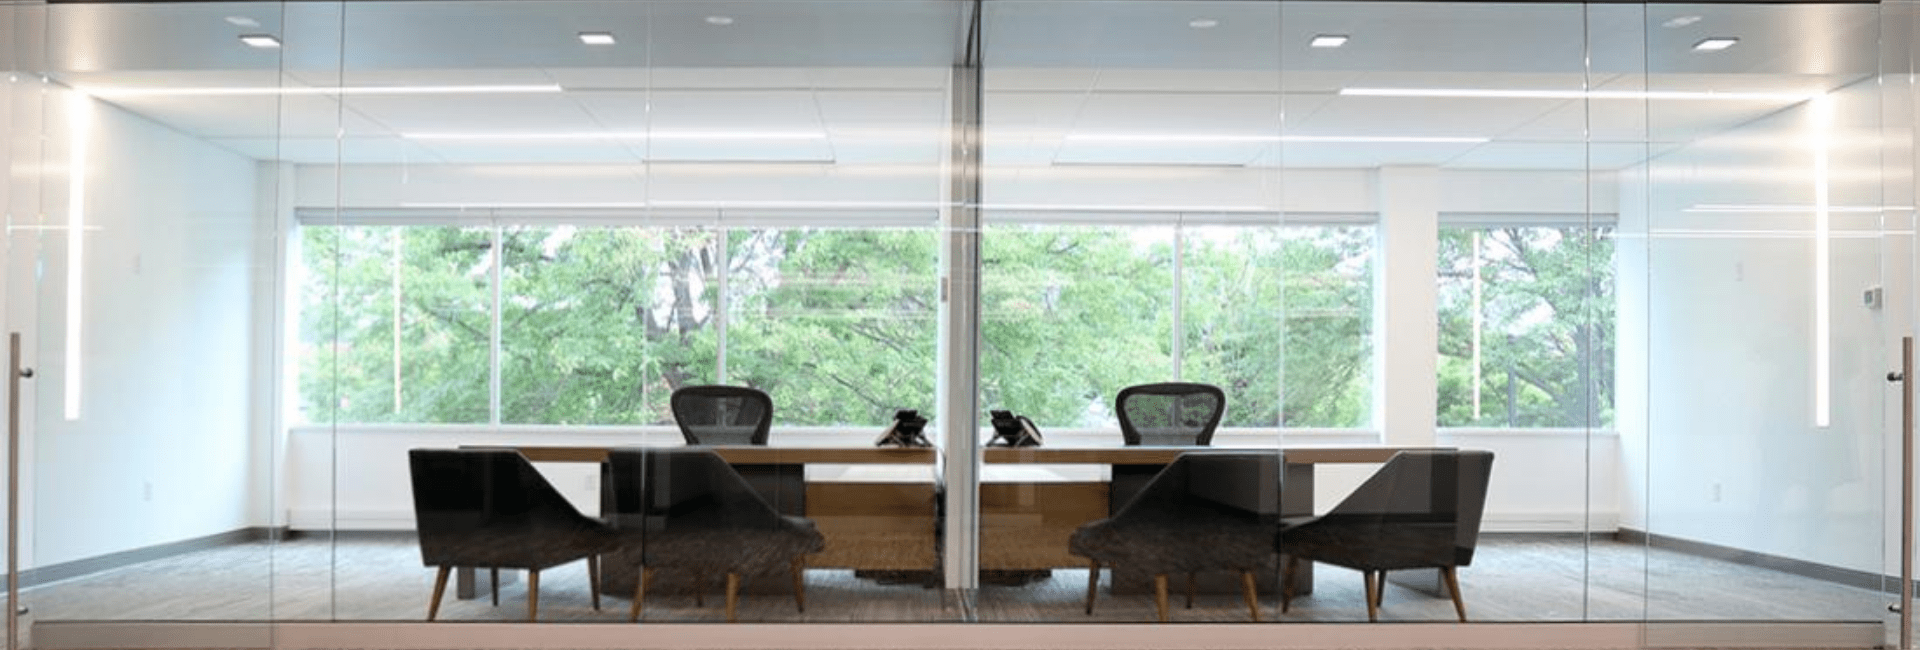 OLED Light and its Impact on Employee Productivity and Well-being